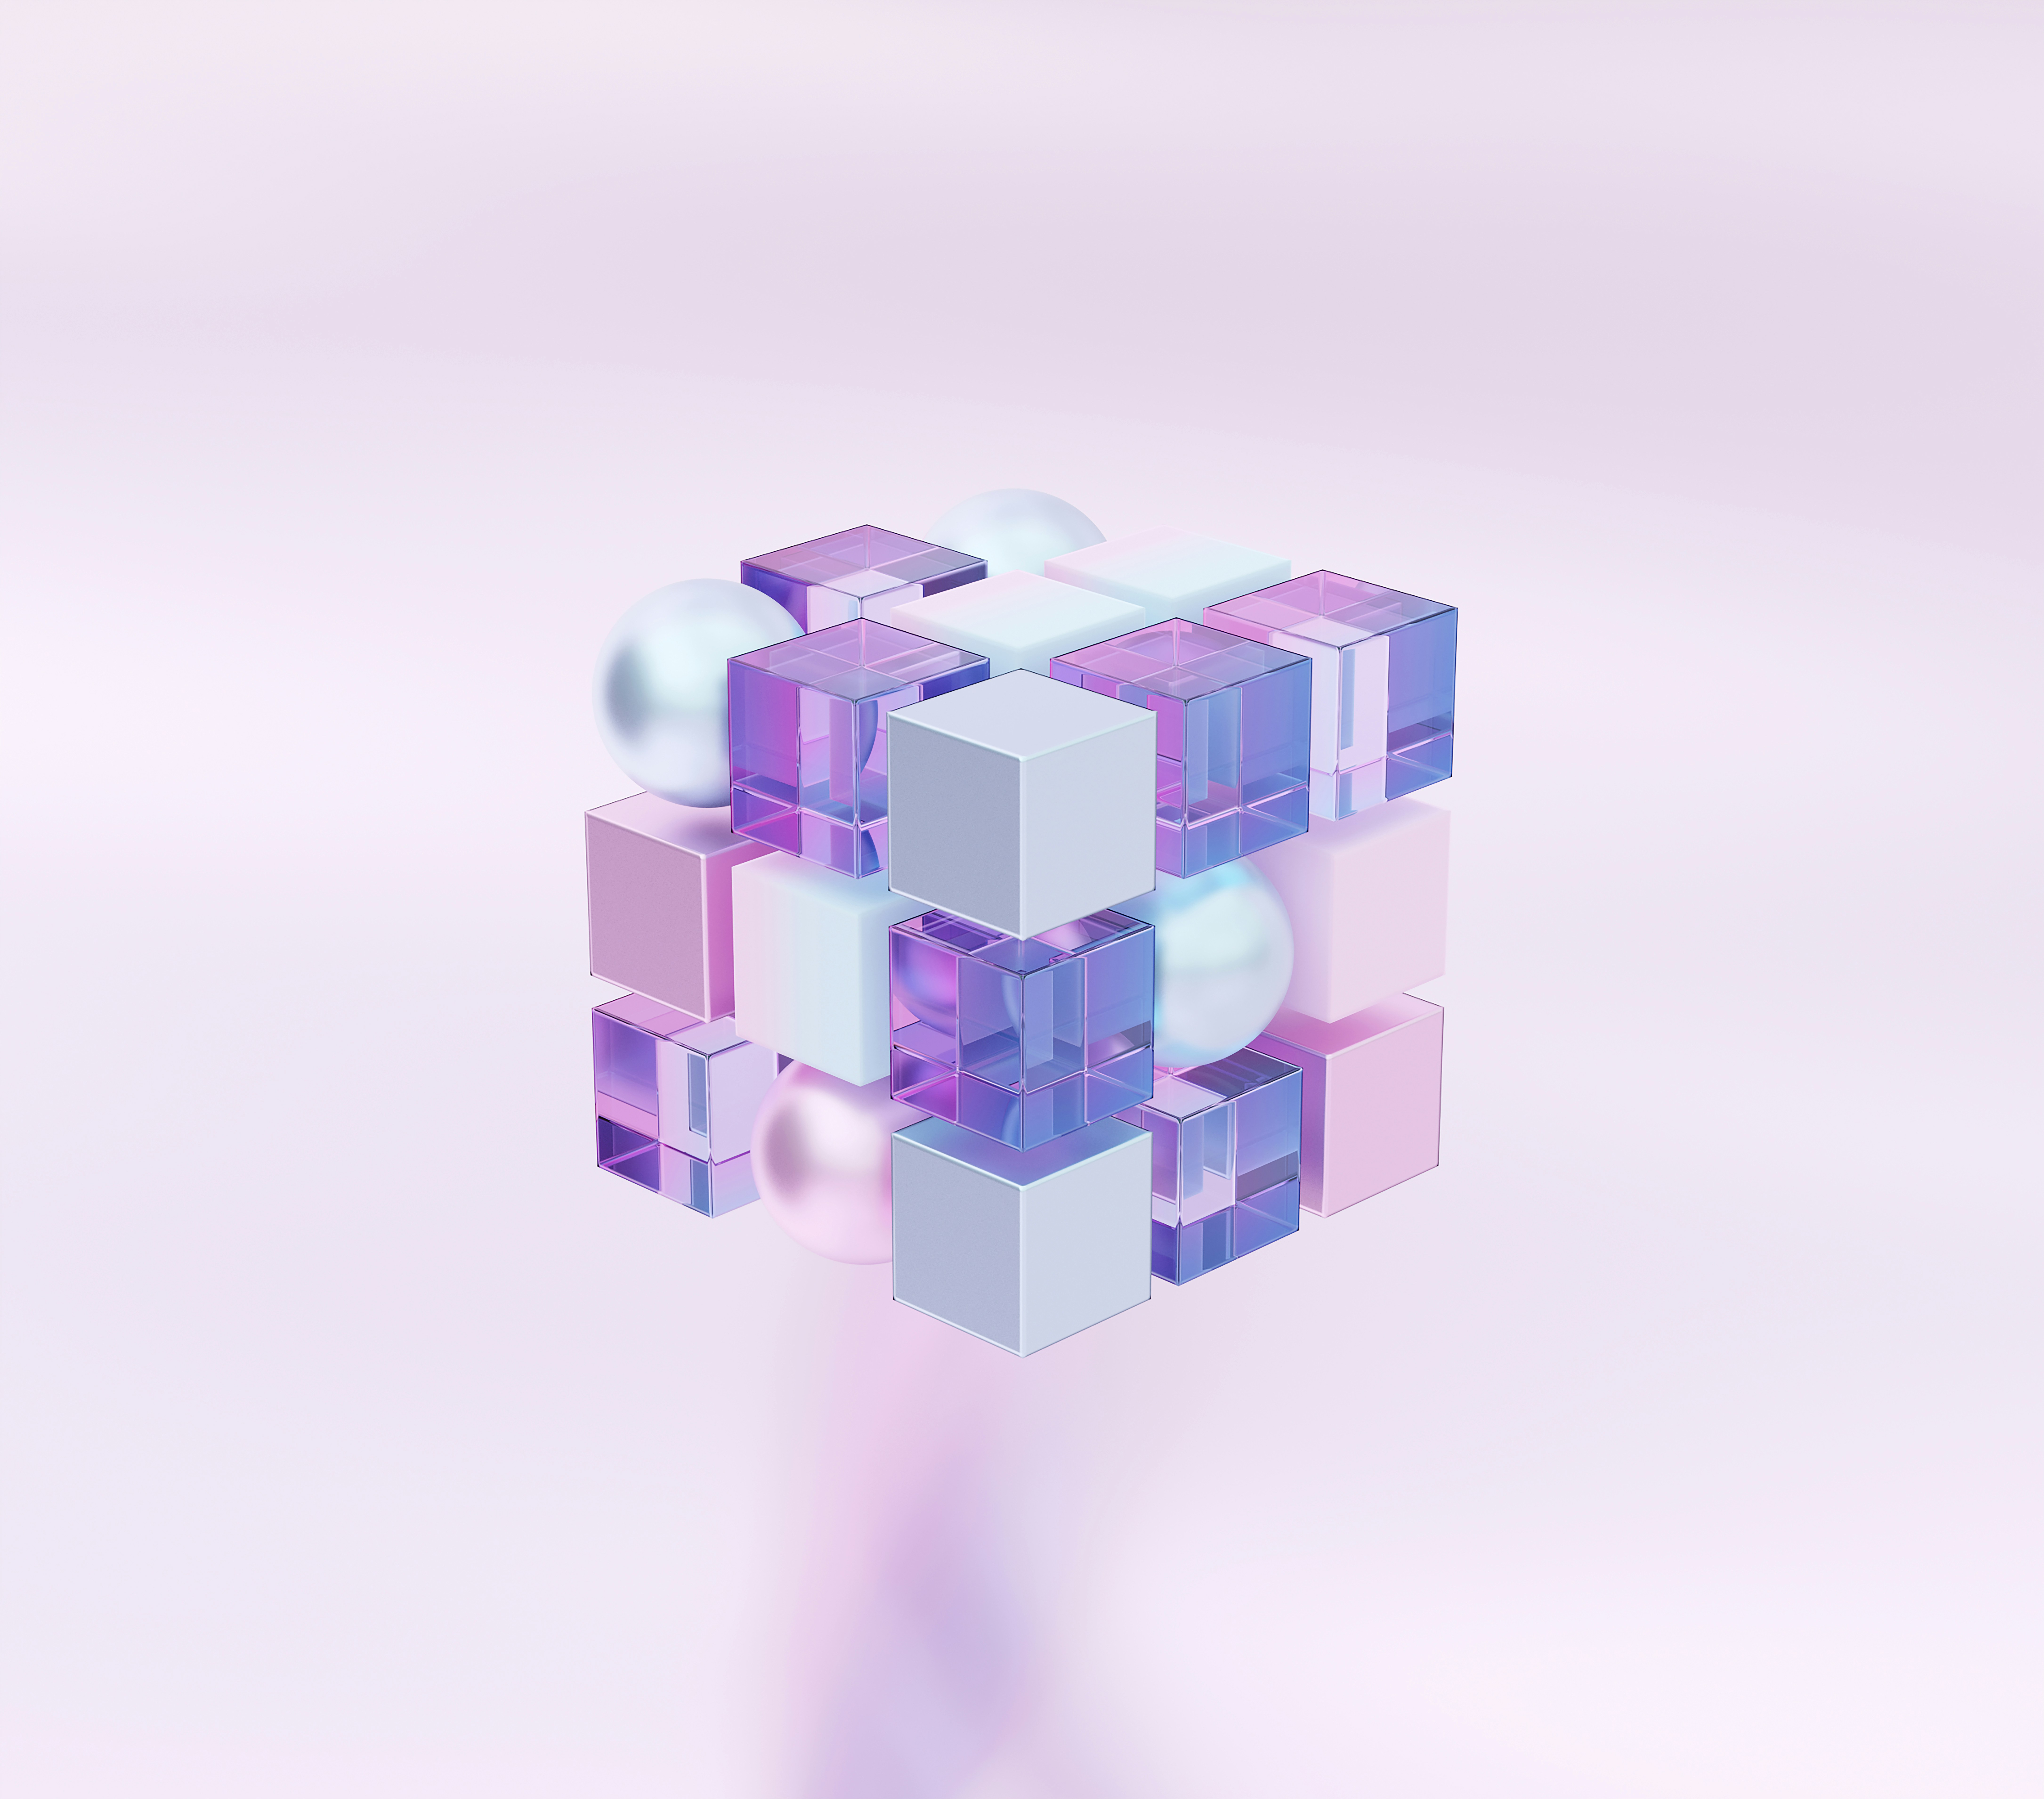 Graphic design of pink and purple cubes stacked together